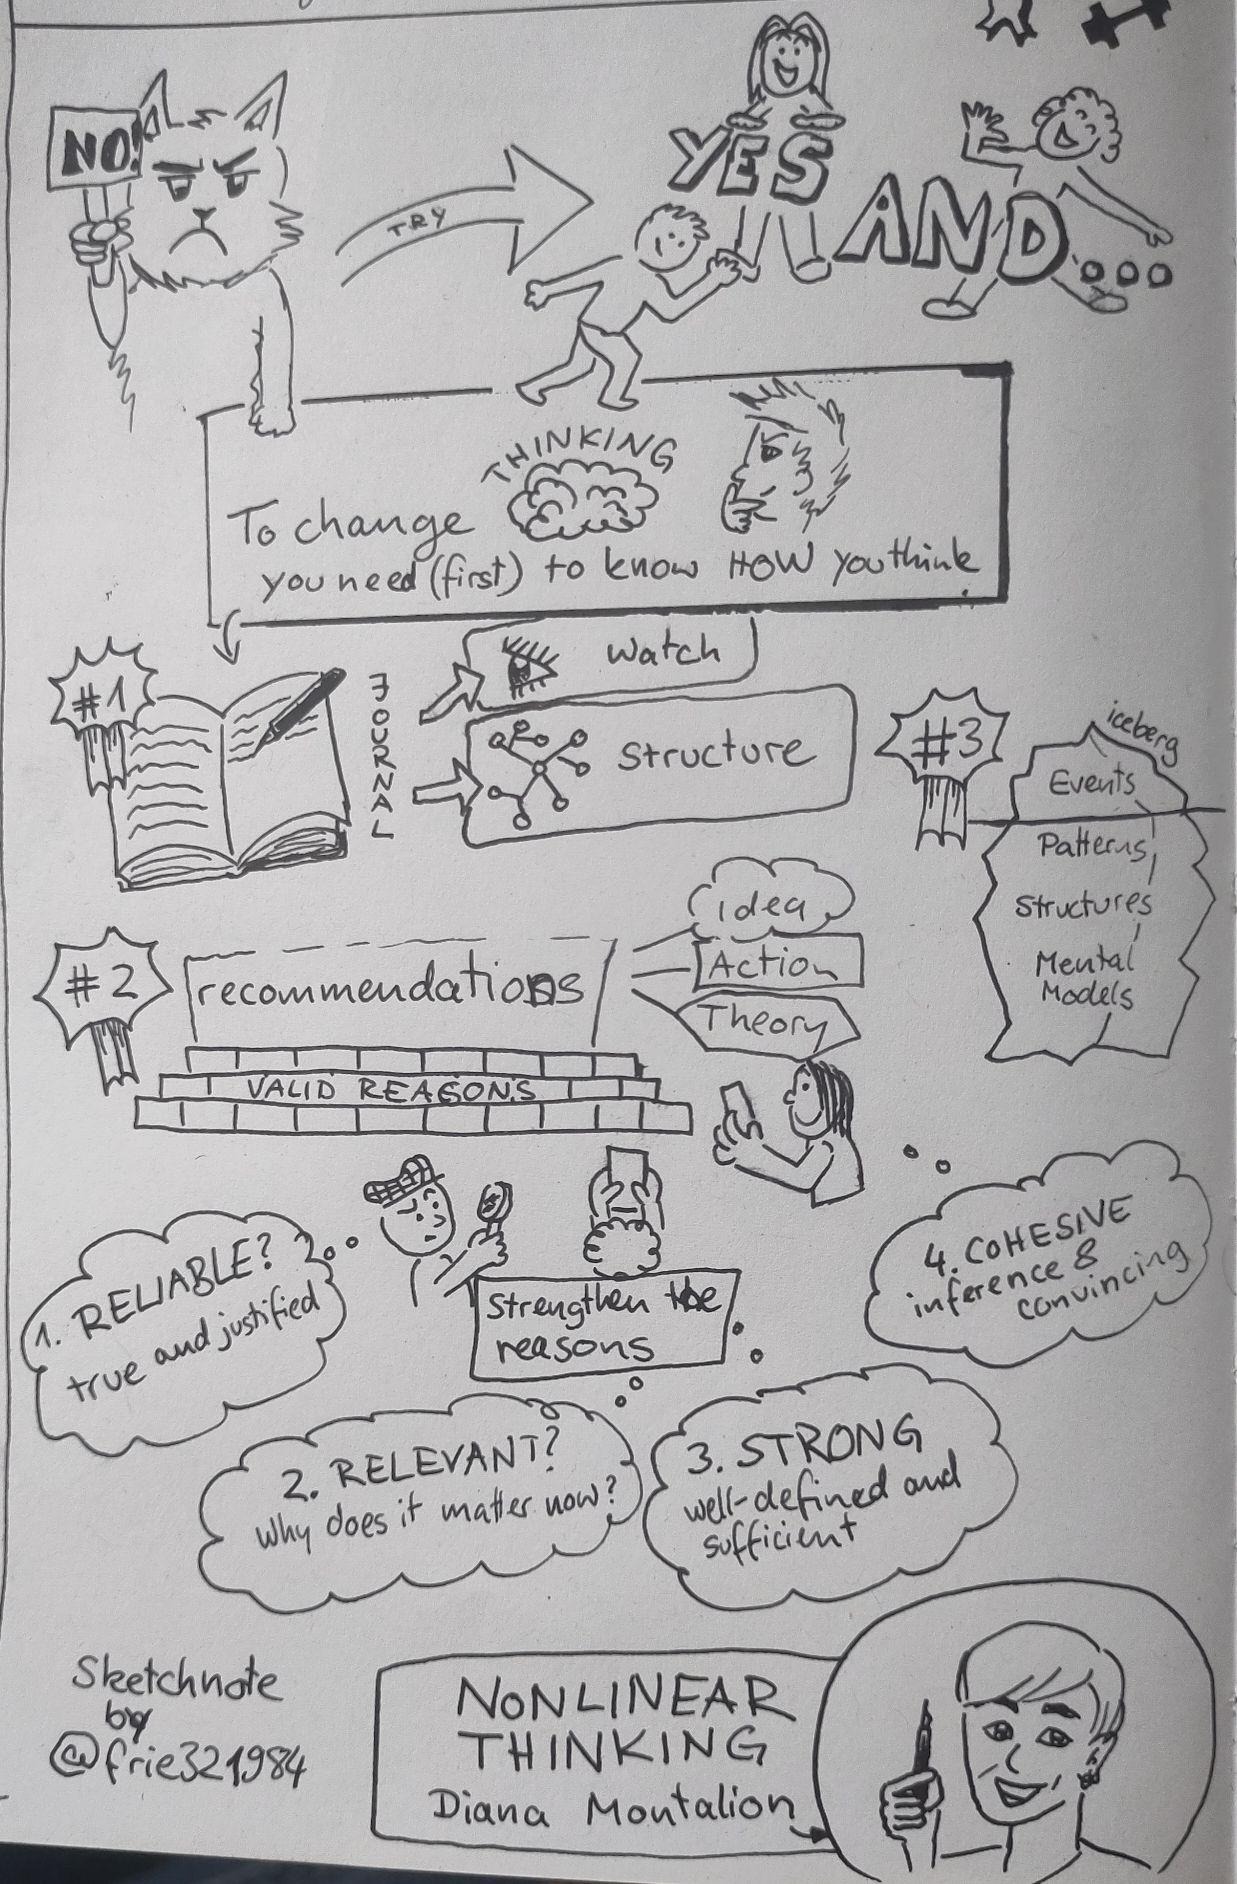 This is a sketchnote of the workshop. The content is described in the text below.